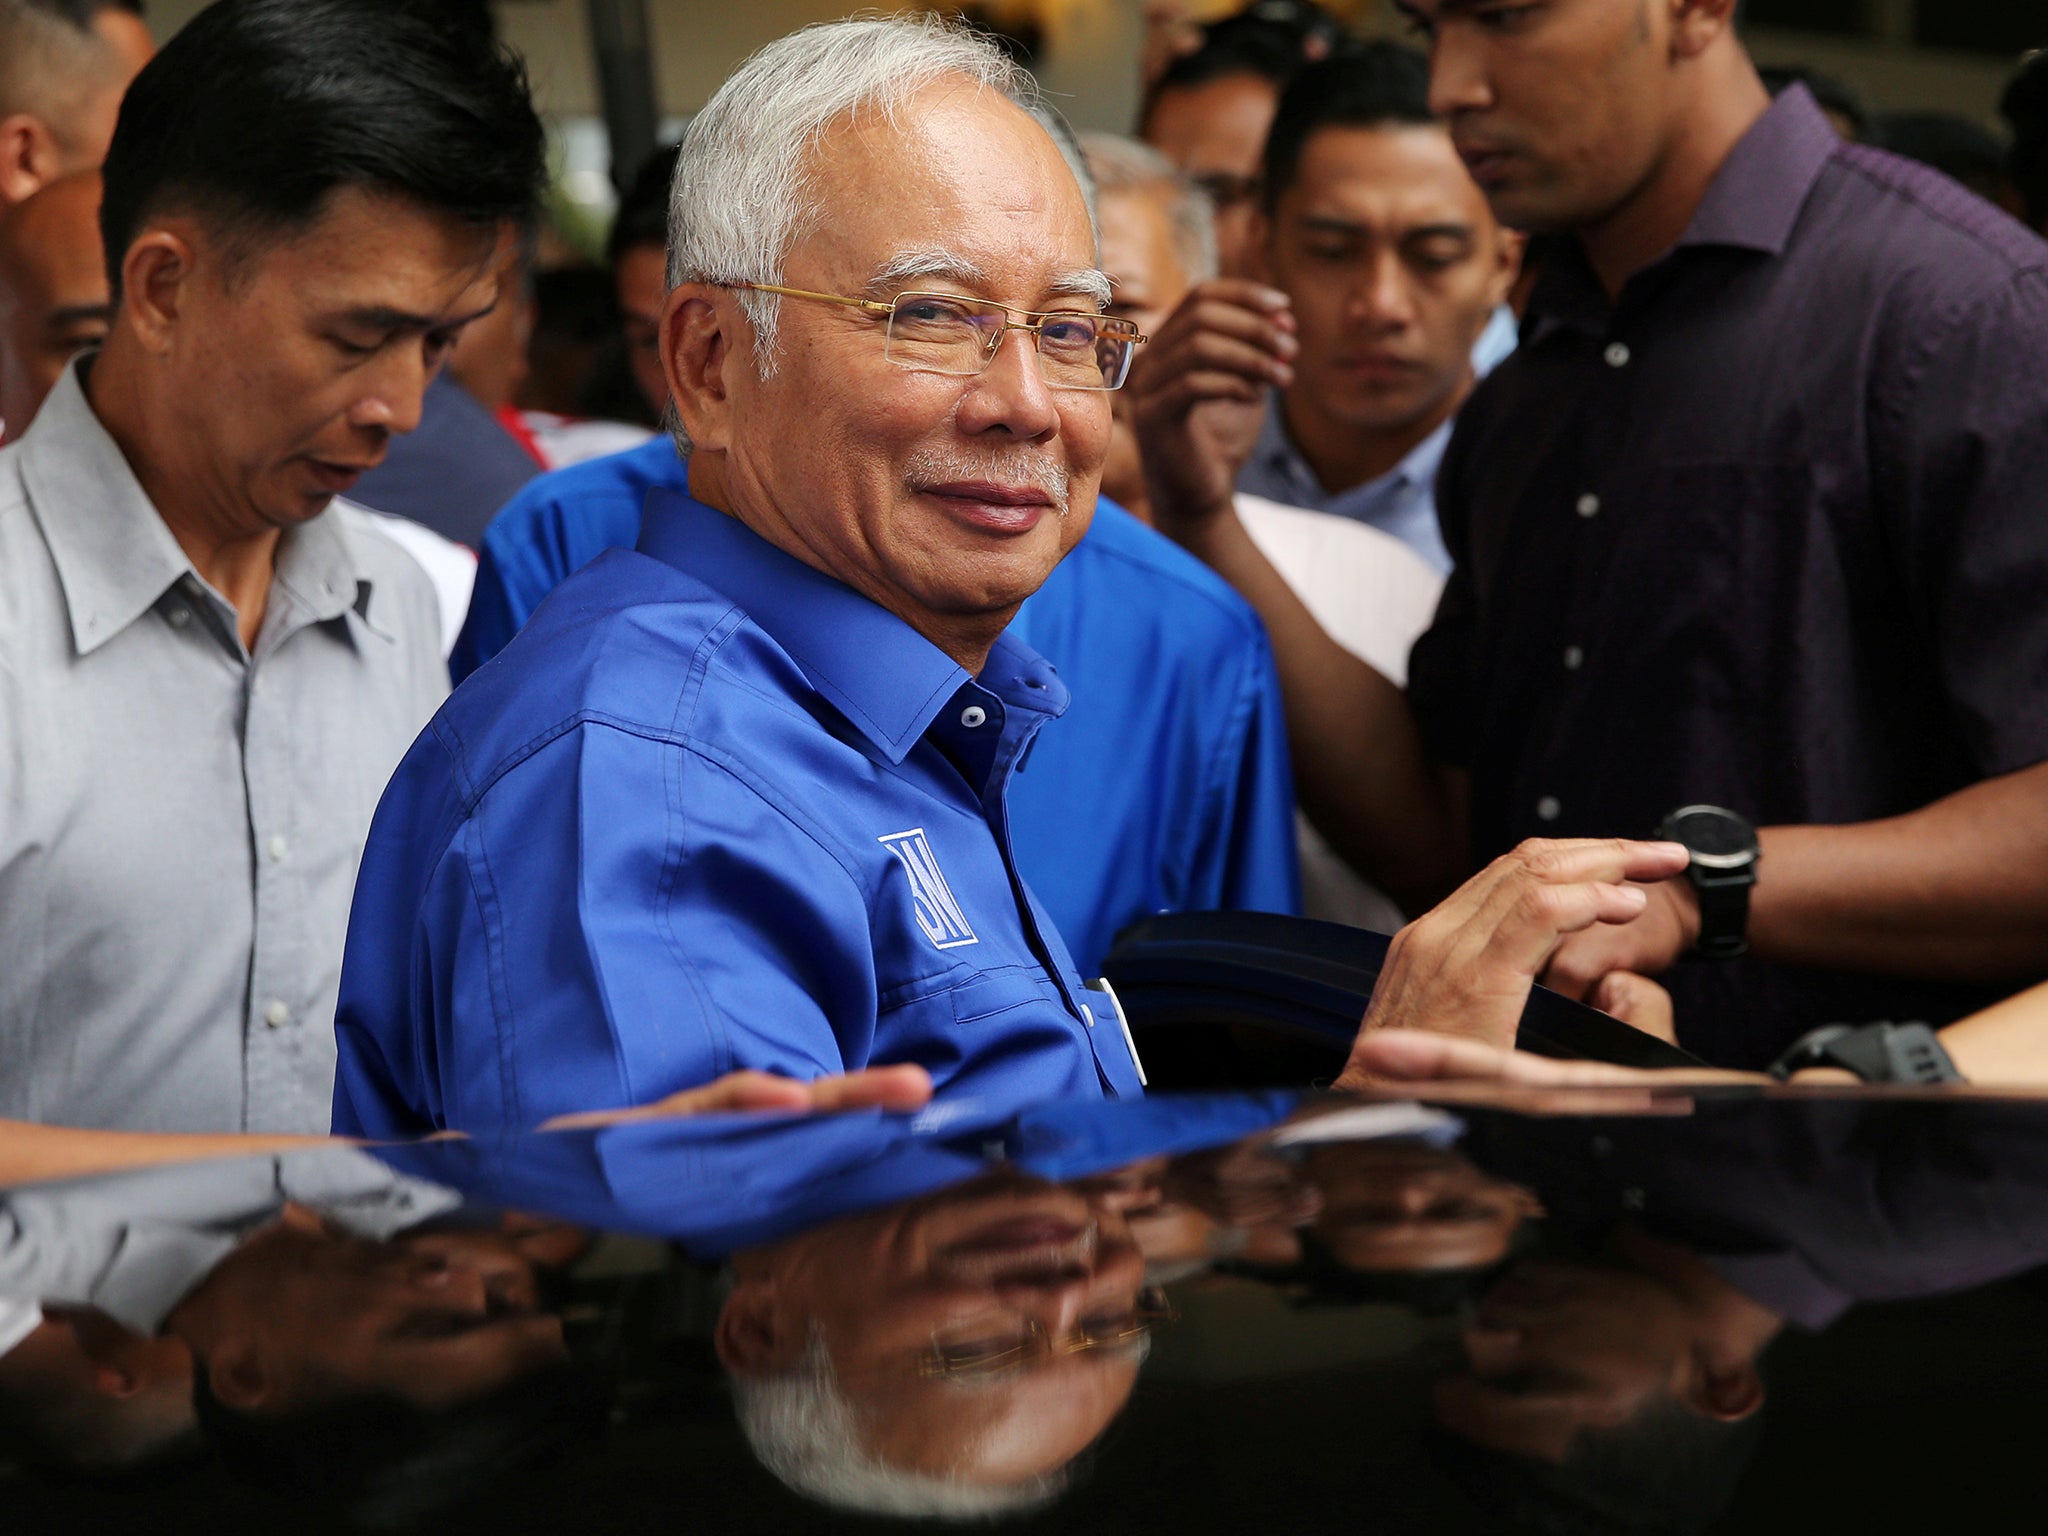 Malaysia's former Prime Minister Najib Razak is at the heart of a multibillion corruption scandal after US investigators accused his associates of stealing $4.5 billion from a state fund